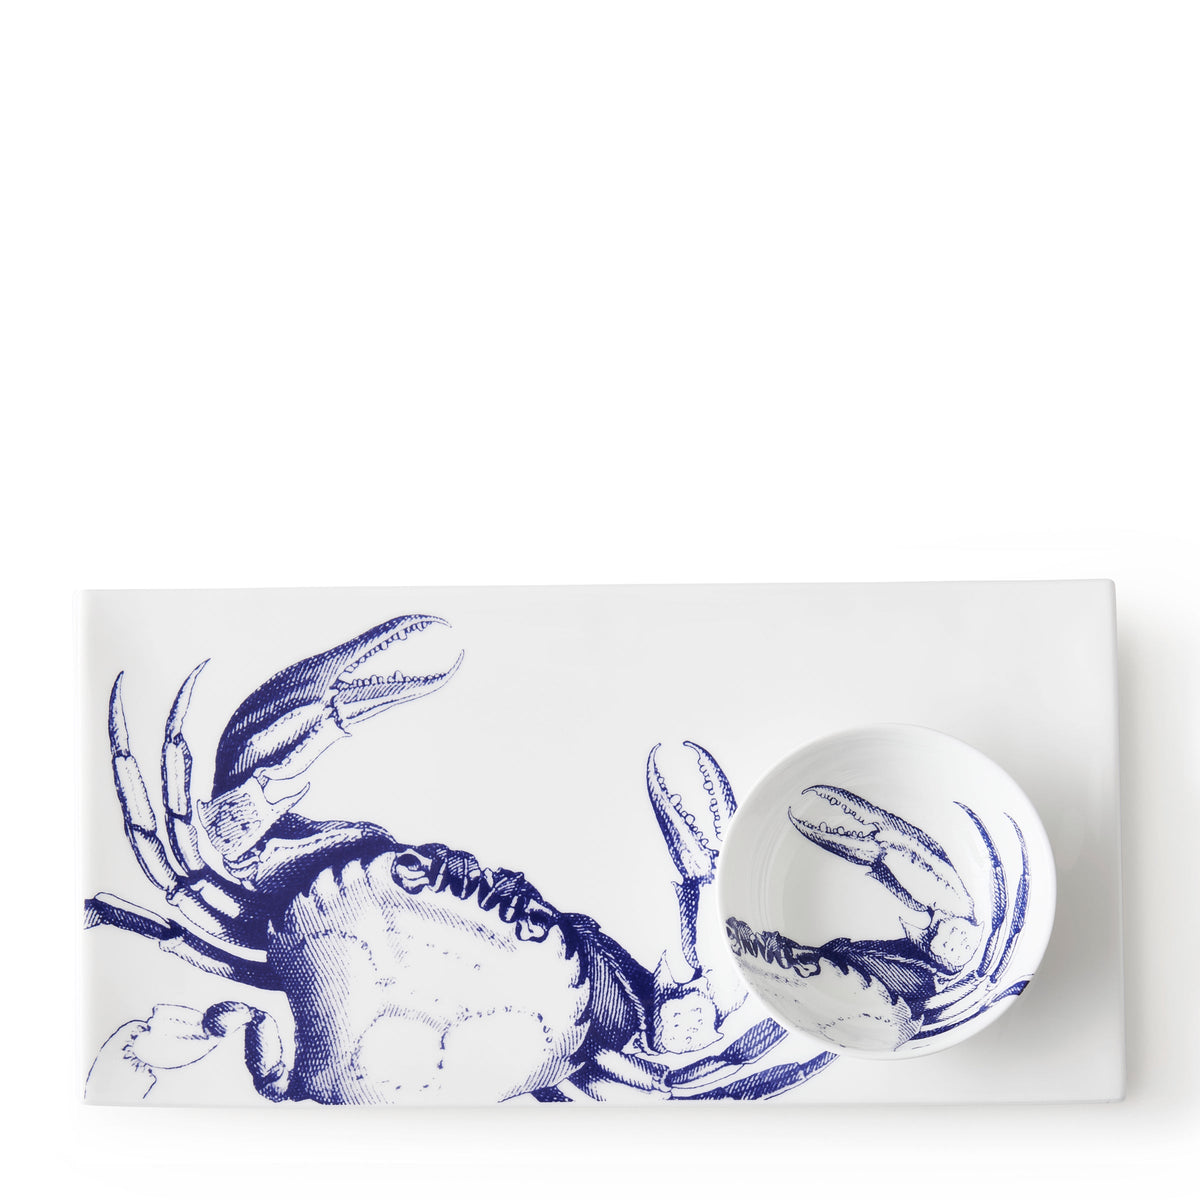 A rectangular white platter featuring a detailed crab pattern illustration, paired with a small round bowl for serving sauces, placed on the right side of the platter from the Caskata Crab Dipping Dishes, Set of 4.